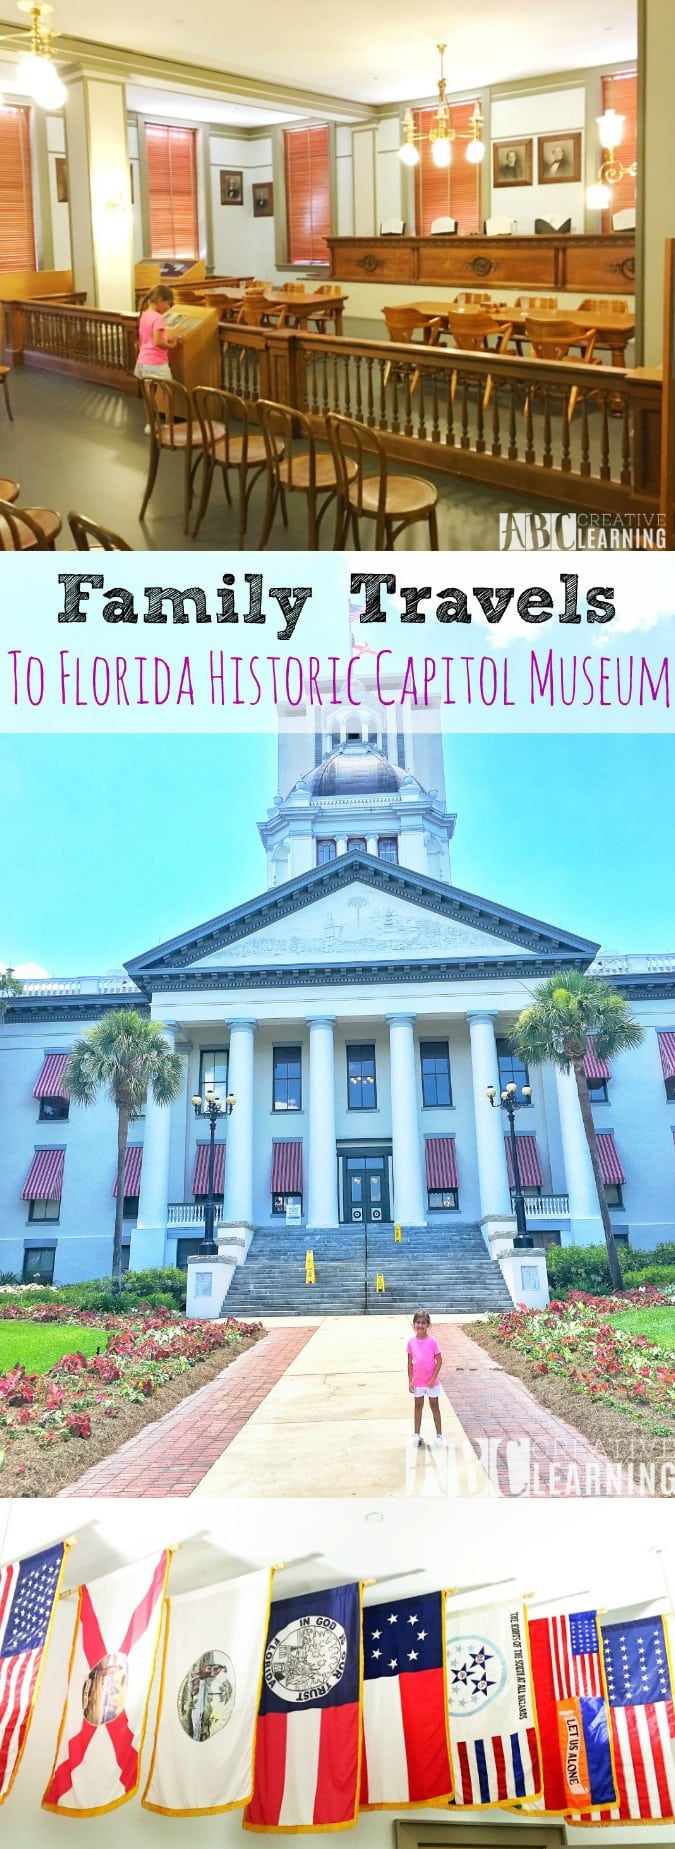 Family Travels To Florida Historic Capitol Museum - simplytodaylife.com